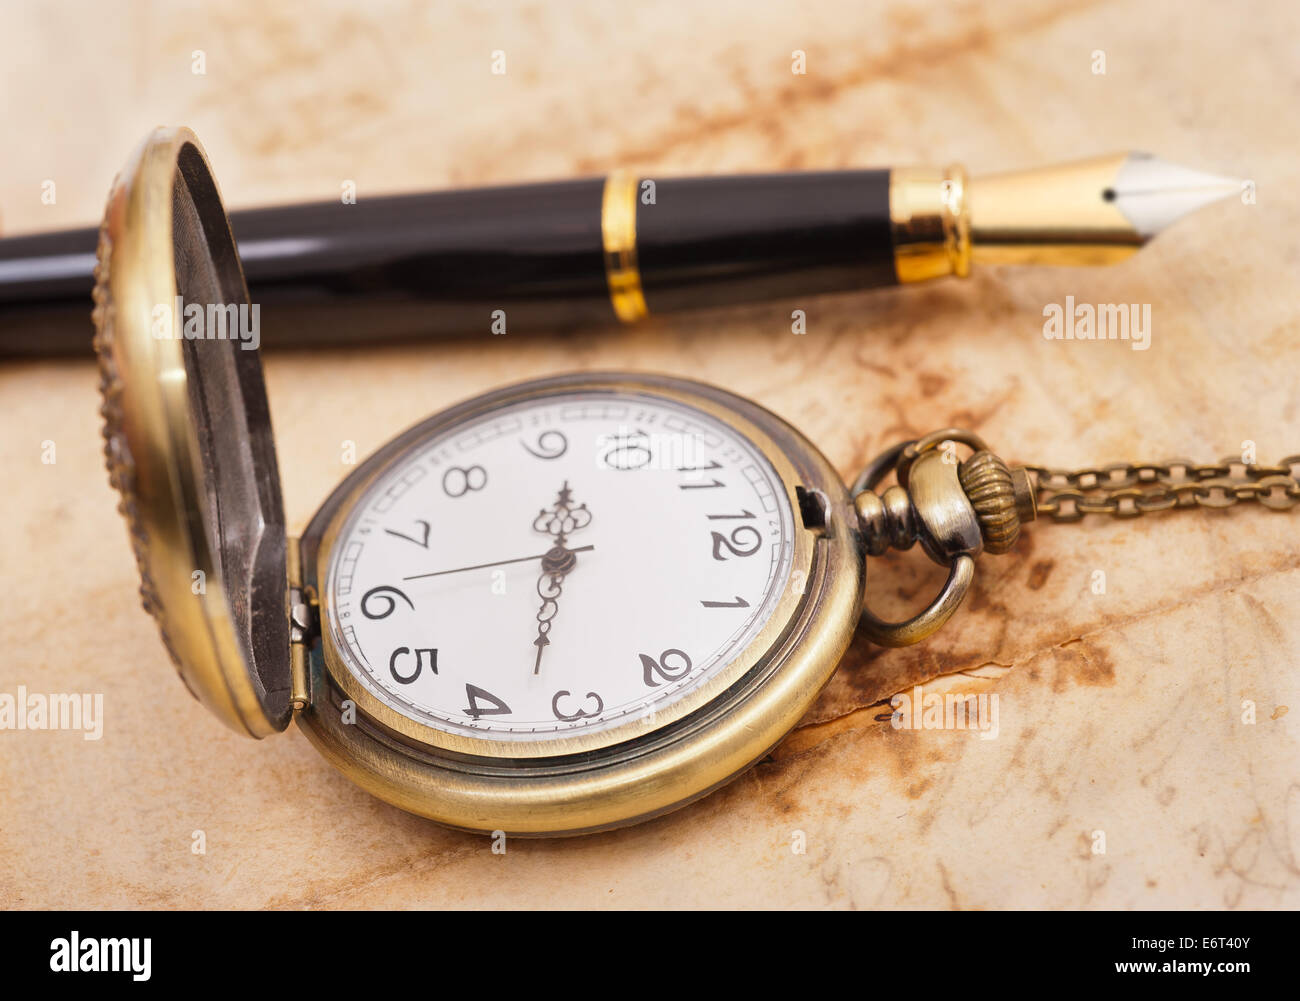 fountain pen and pocketwatch on old sheet Stock Photo